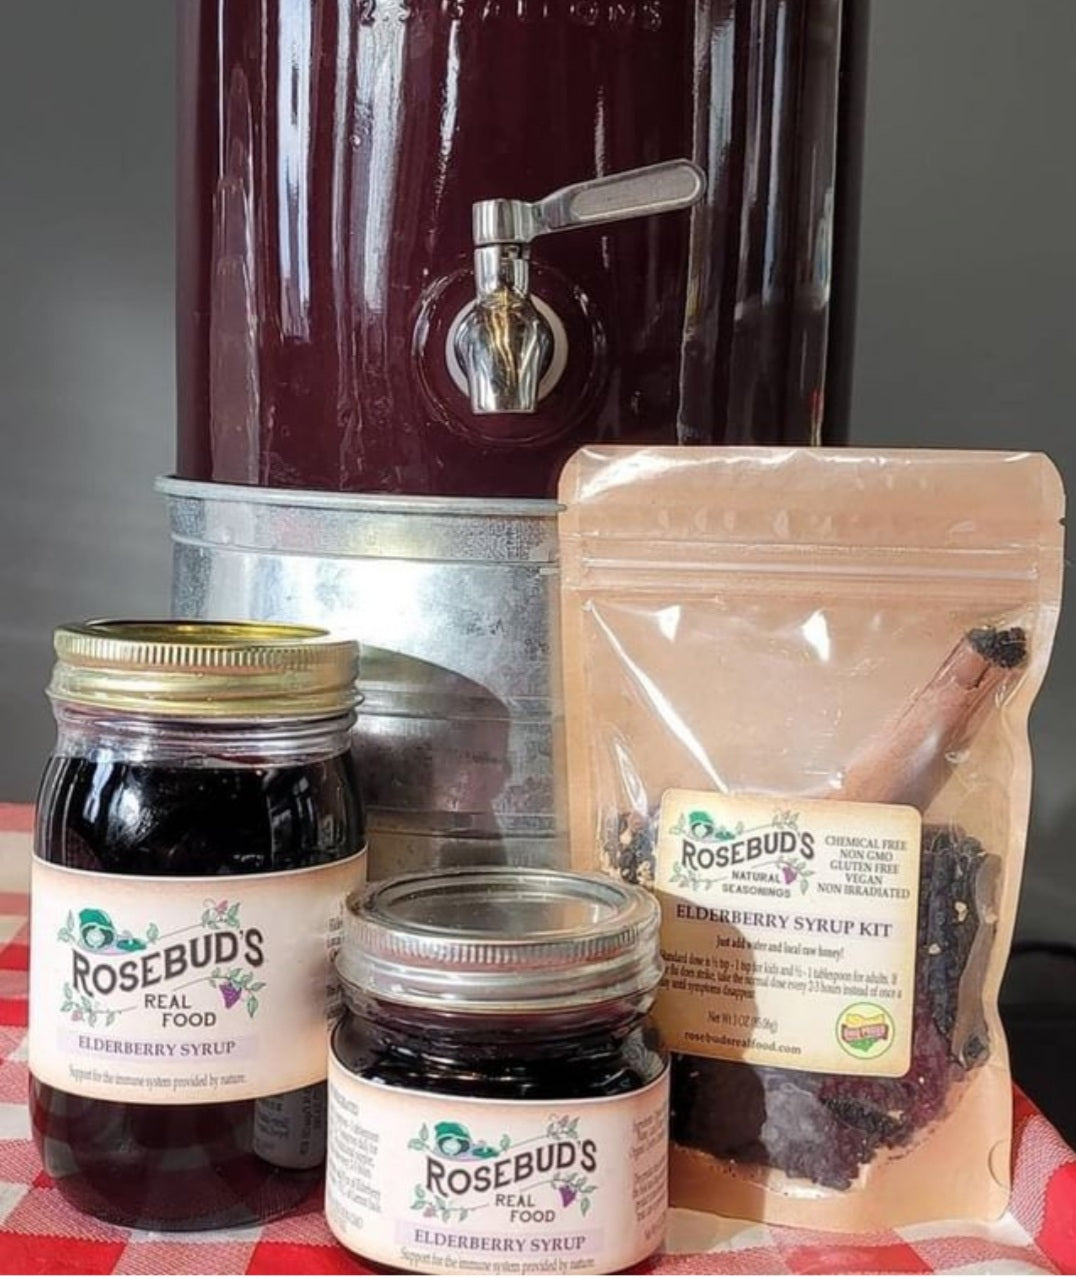 Elderberry Syrup Kit - Make your own Elderberry Syrup using honey local to you!